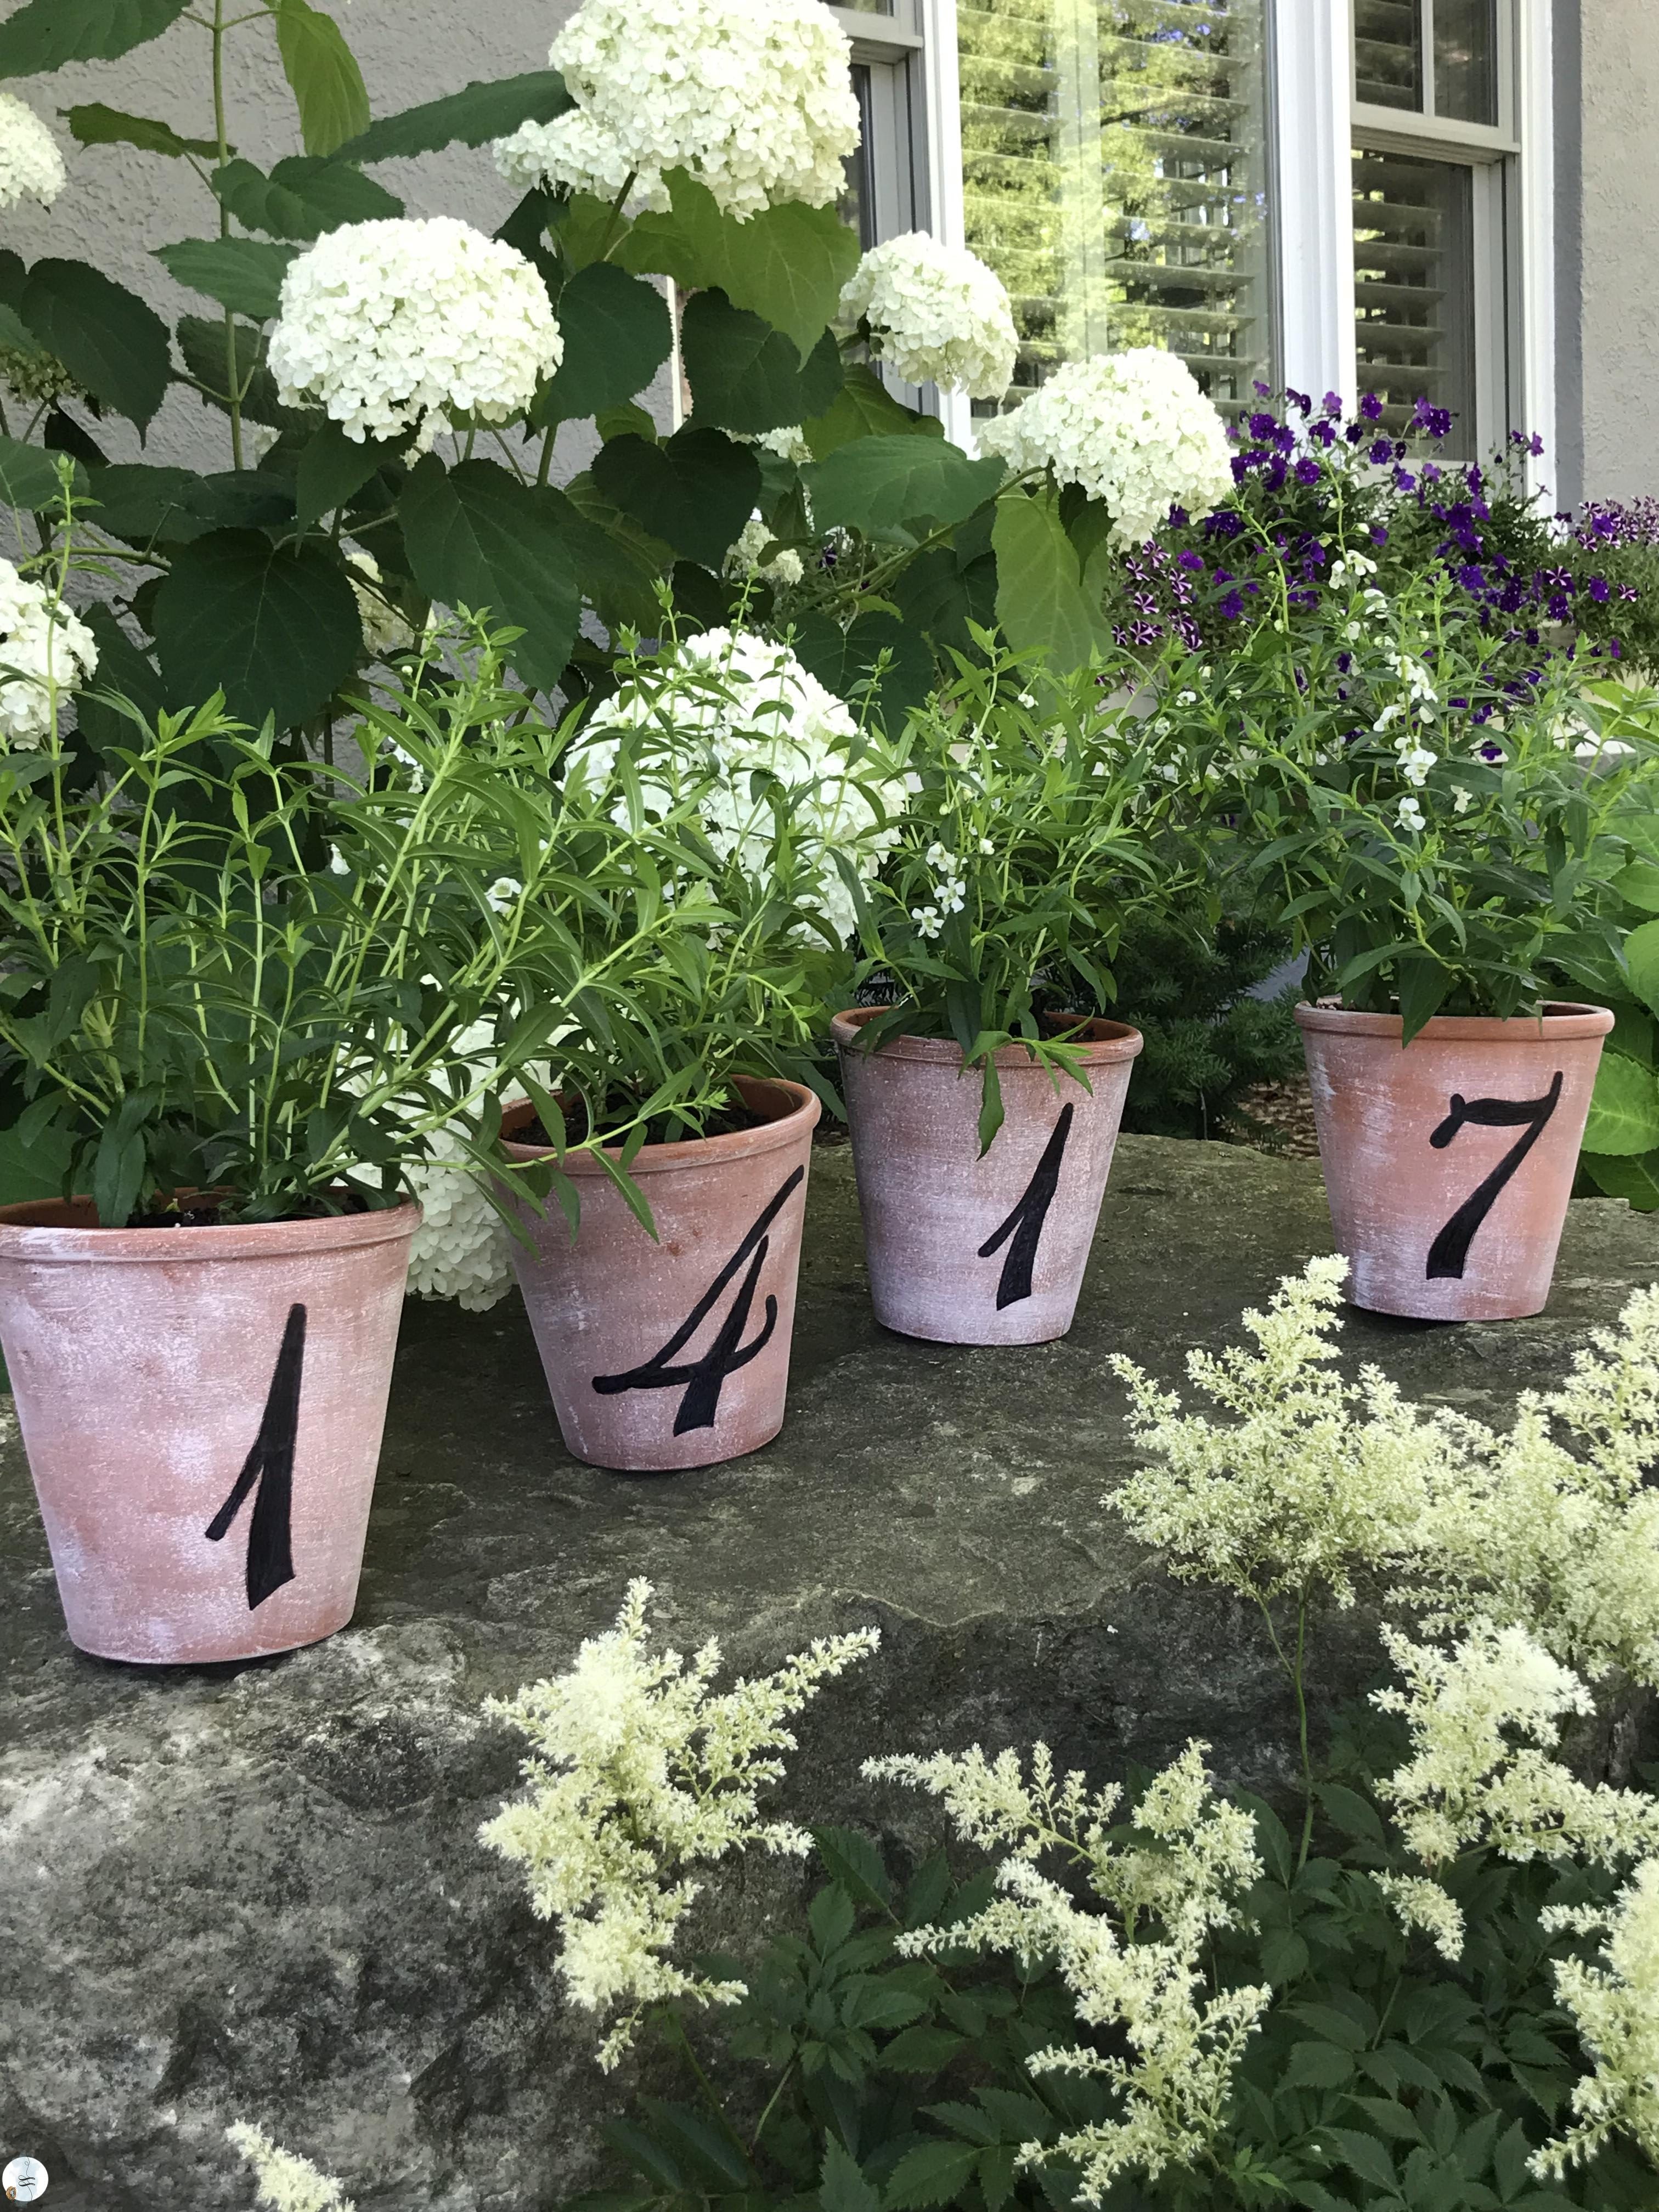 Perfect to give for mother's day or house warming...or just keep them for yourself. Aged flower pots with house numbers painted on them.